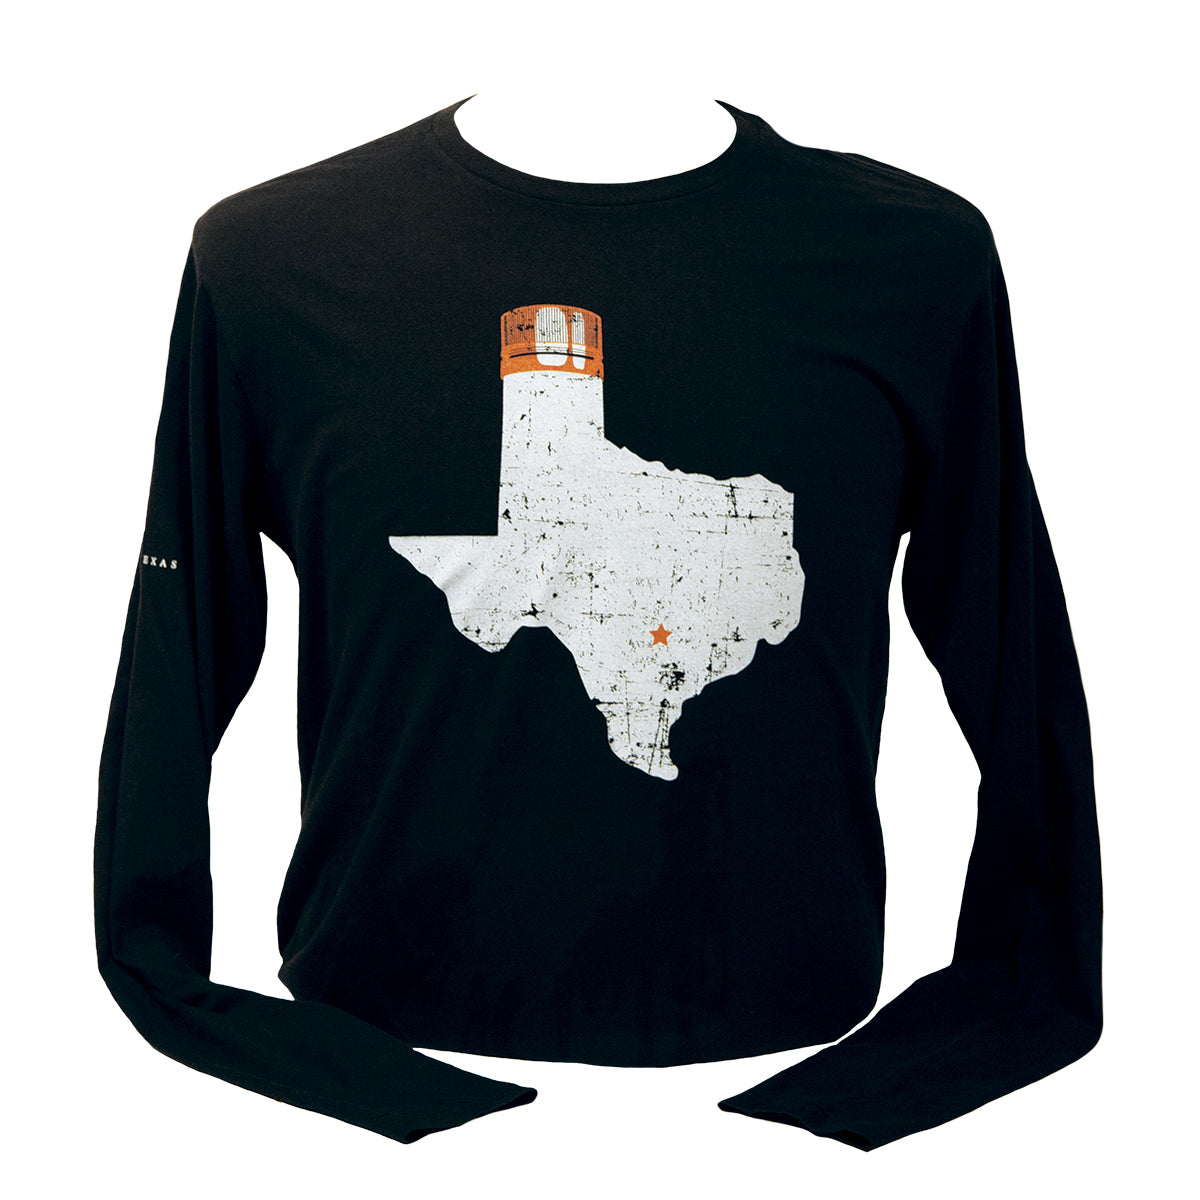 Black long sleeve with large Texas state image, star on Austin's location, and Tito's Copper top on panhandle on front